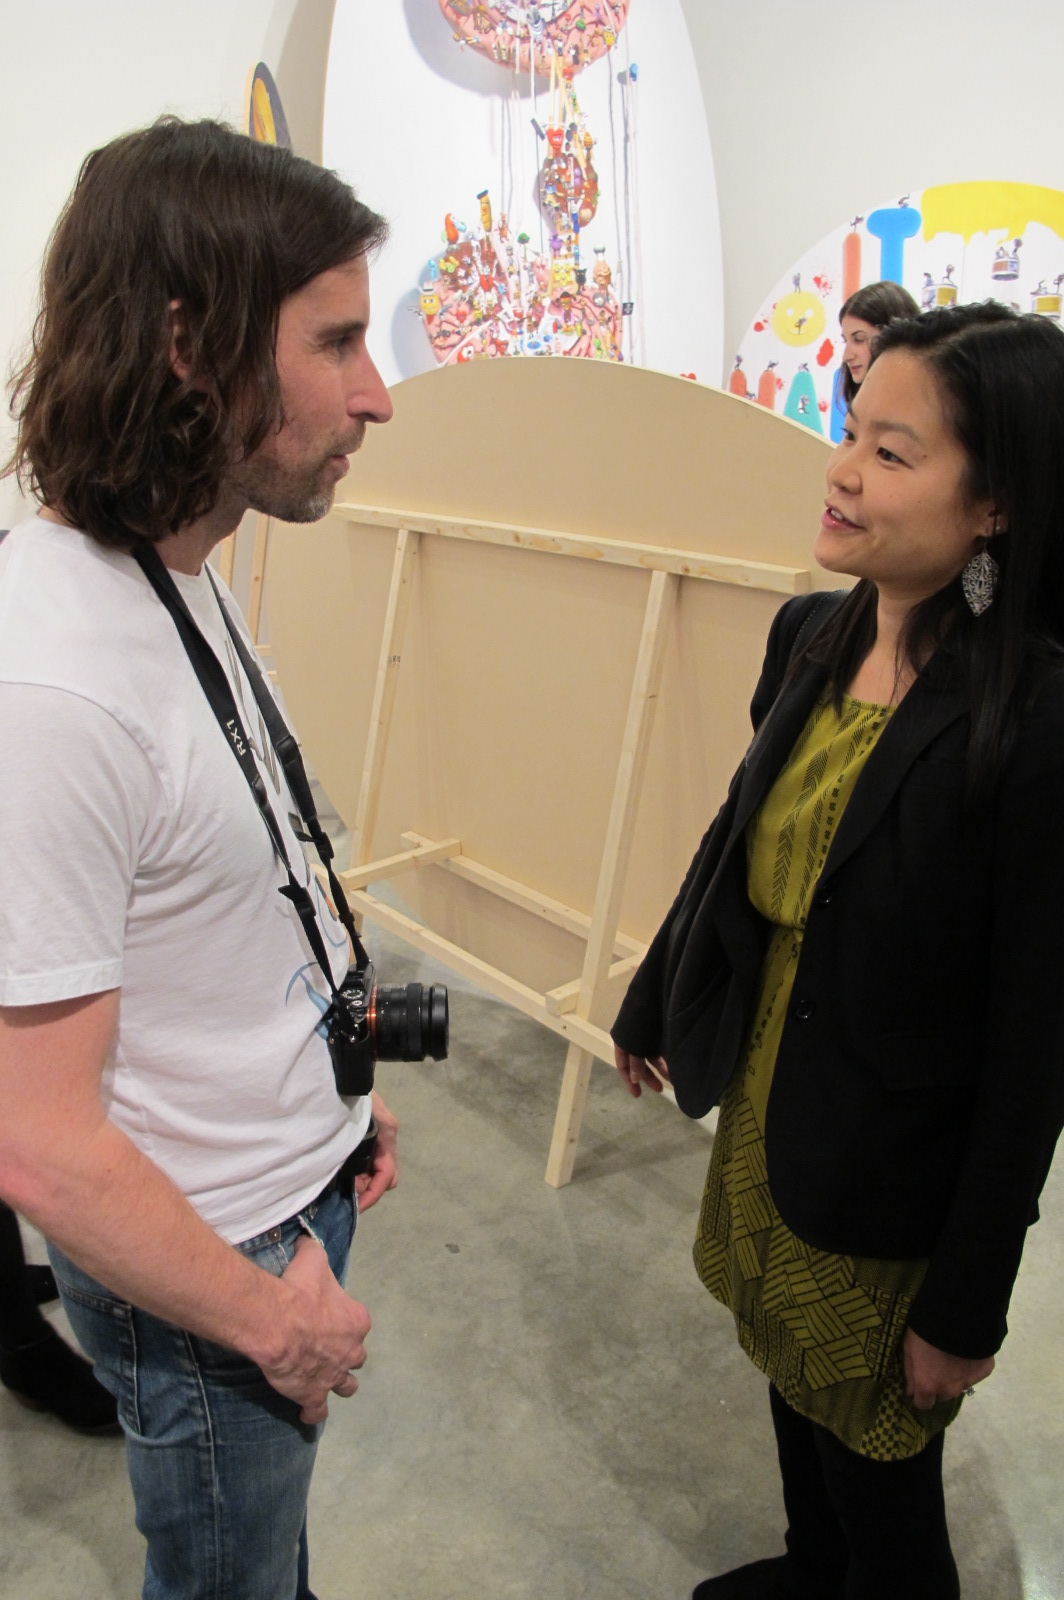 Artist Olaf Breuning talking to a guest